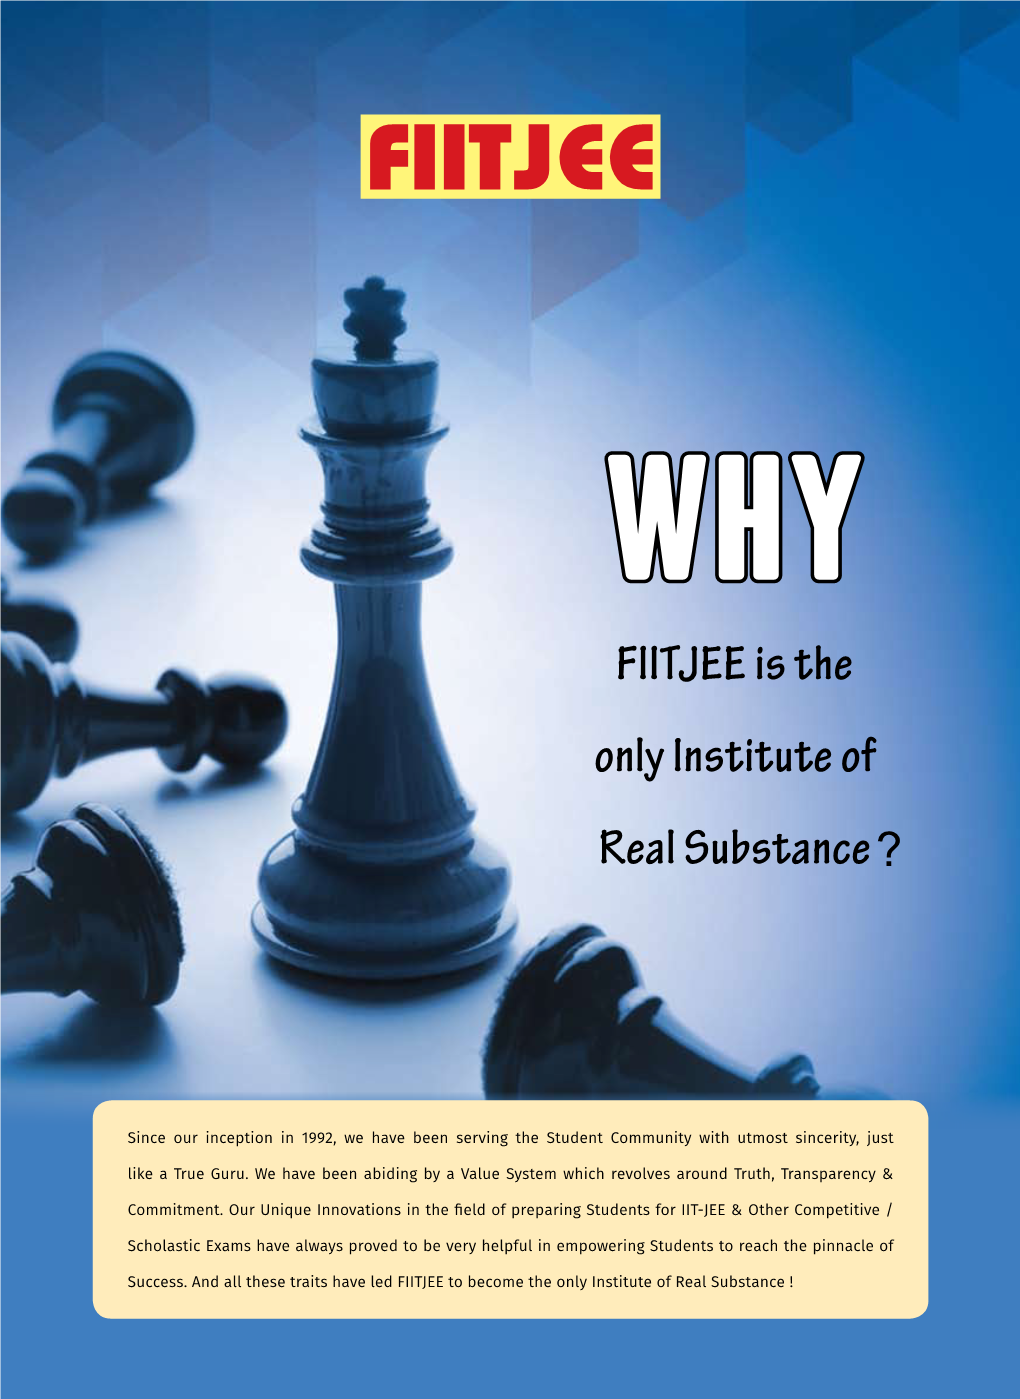 FIITJEE Is the Only Institute of Real Substance?